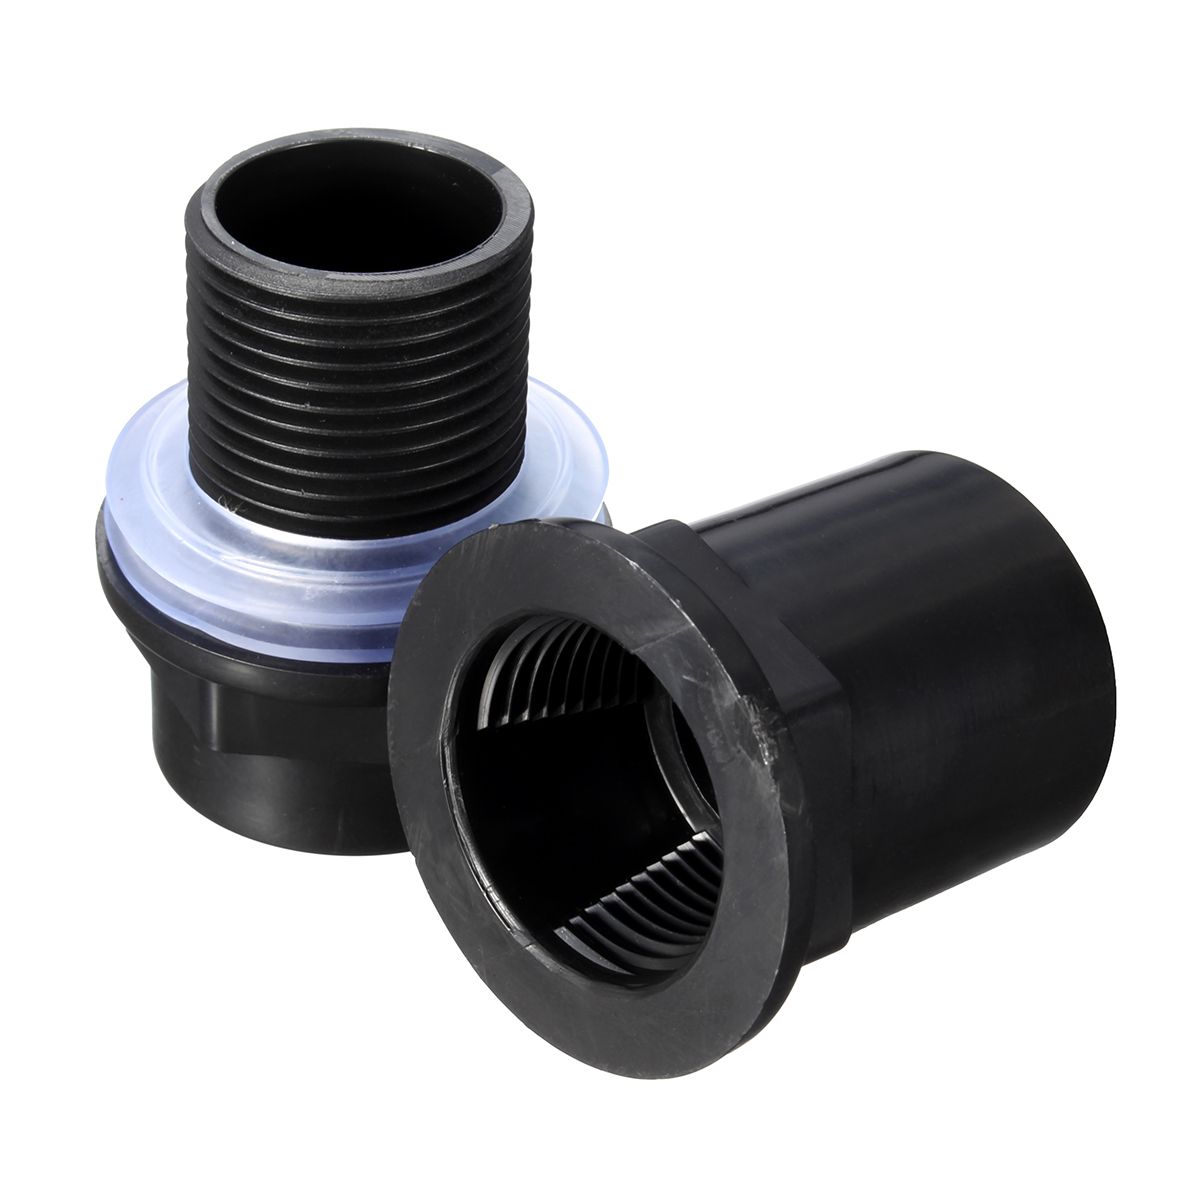 Aquarium-PVC-Connector-Plastic-PVC-Pipe-Butt-Fish-Tank-Straight-Up-Pipe-Fitting-Joint-Connection-1259908